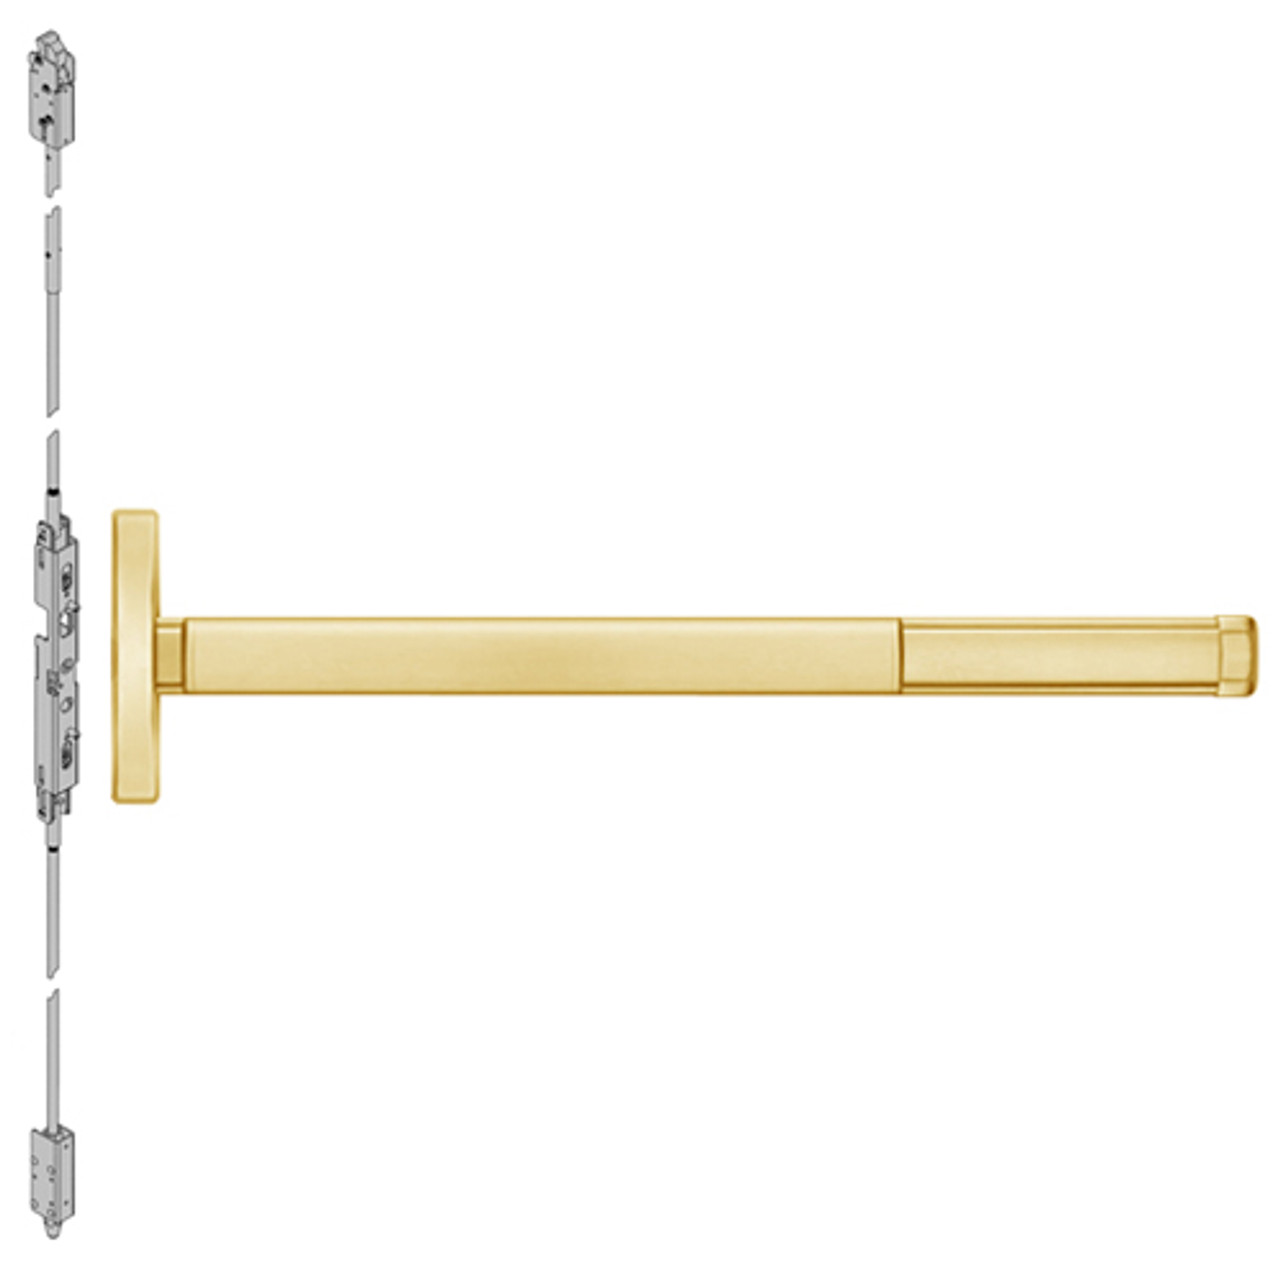 FL2608LBR-605-36 PHI 2600 Series Fire Rated Concealed Vertical Rod Exit Device Prepped for Key Controls Lever with Less Bottom Rod in Bright Brass Finish